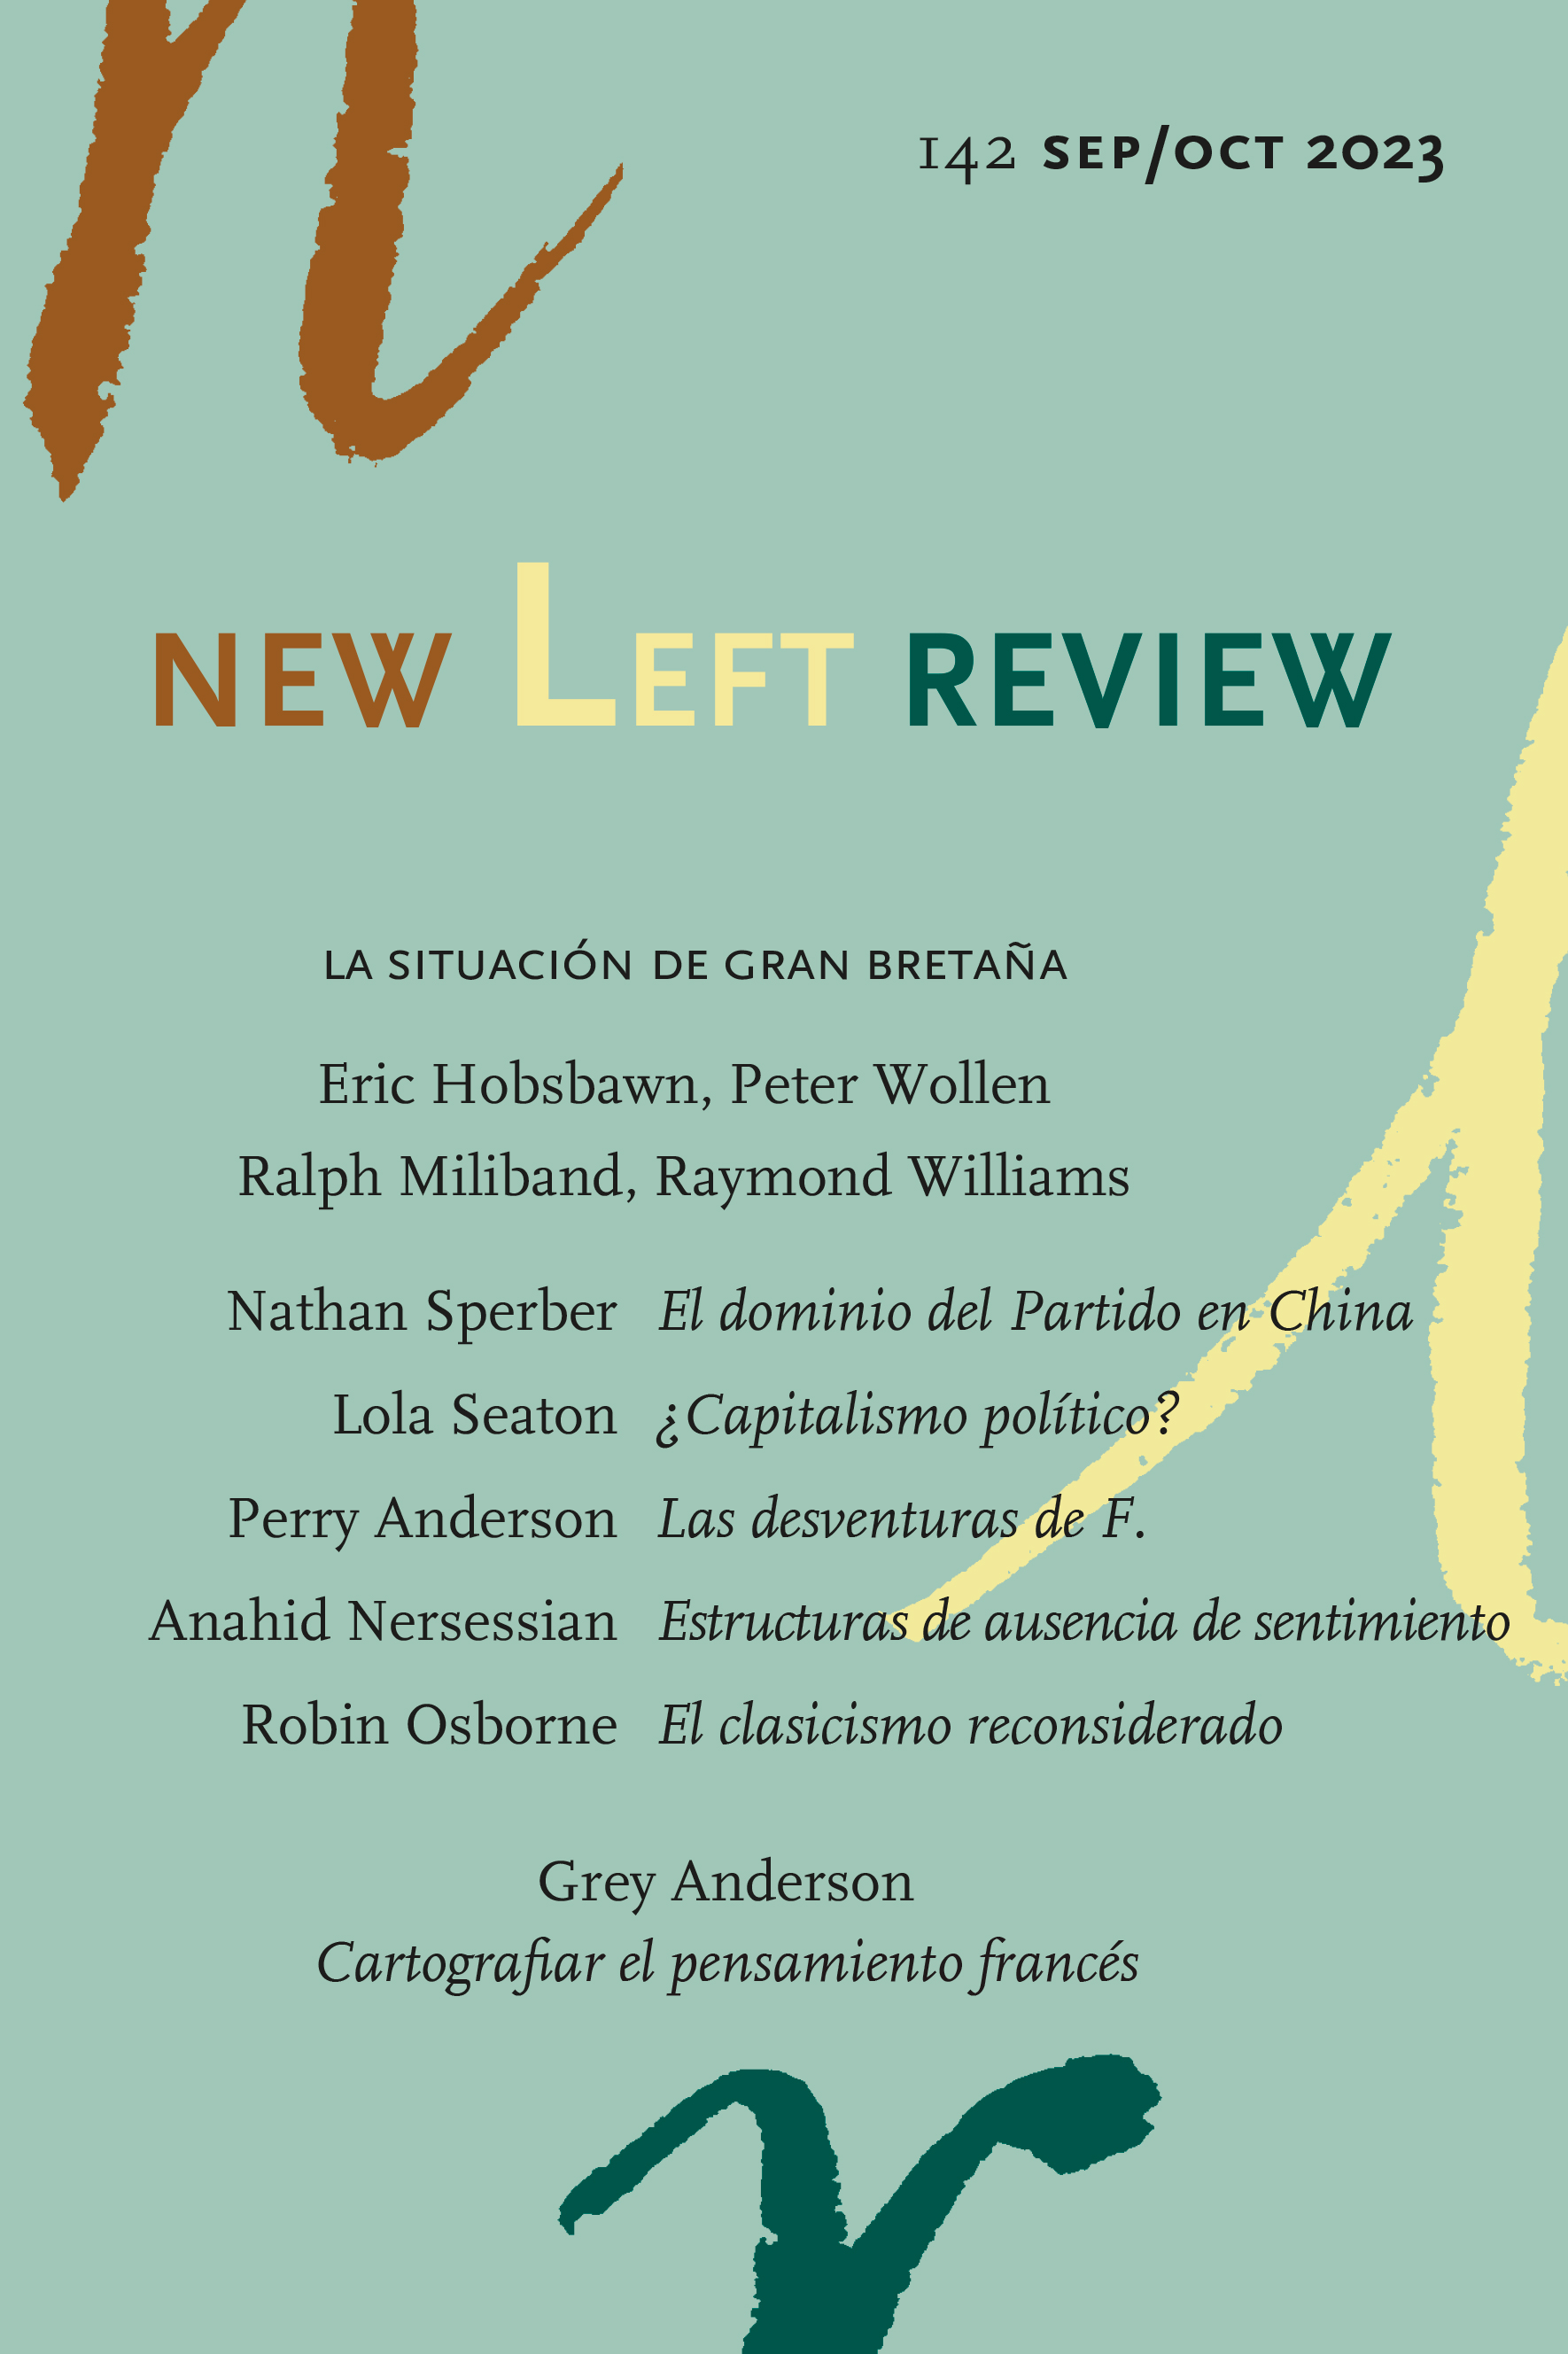 new-left-review-142-9771575977004